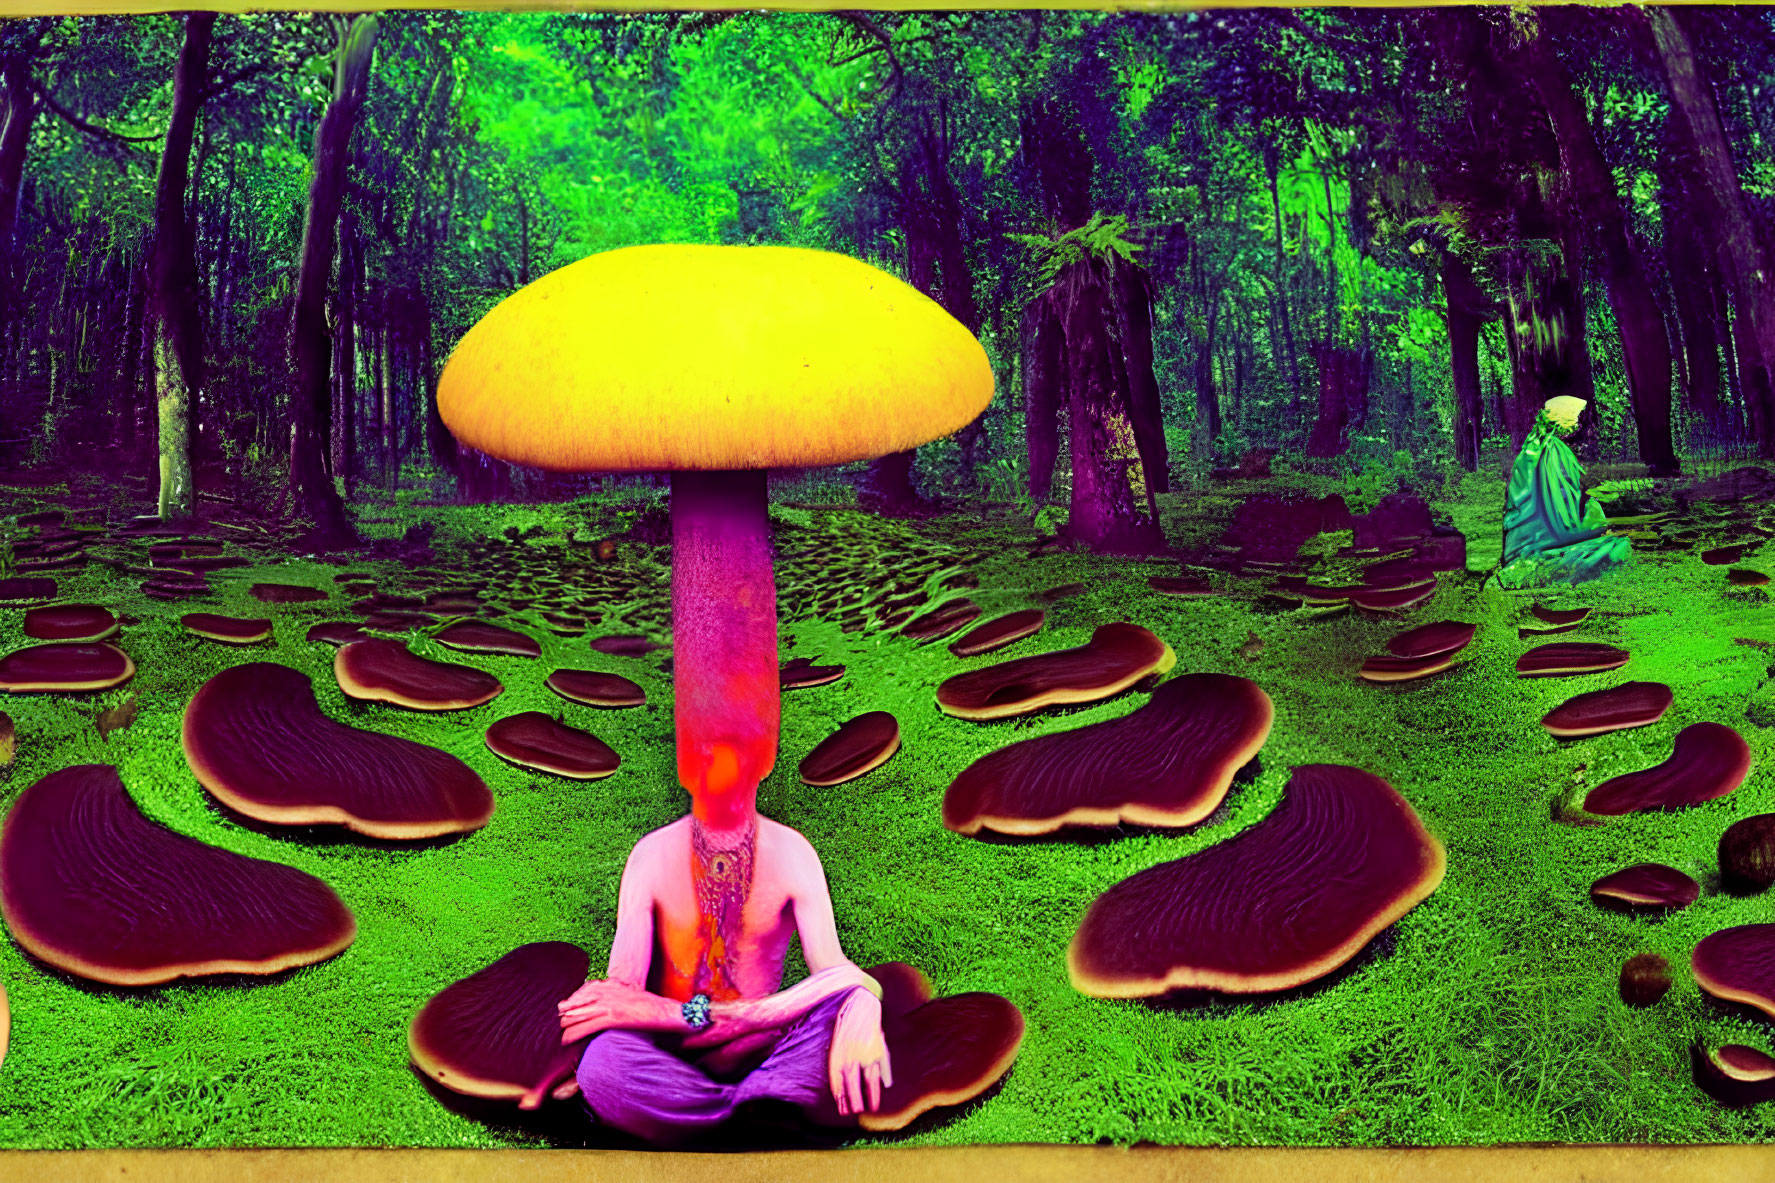 Vibrant surreal forest scene with oversized yellow-capped mushroom and meditating figure